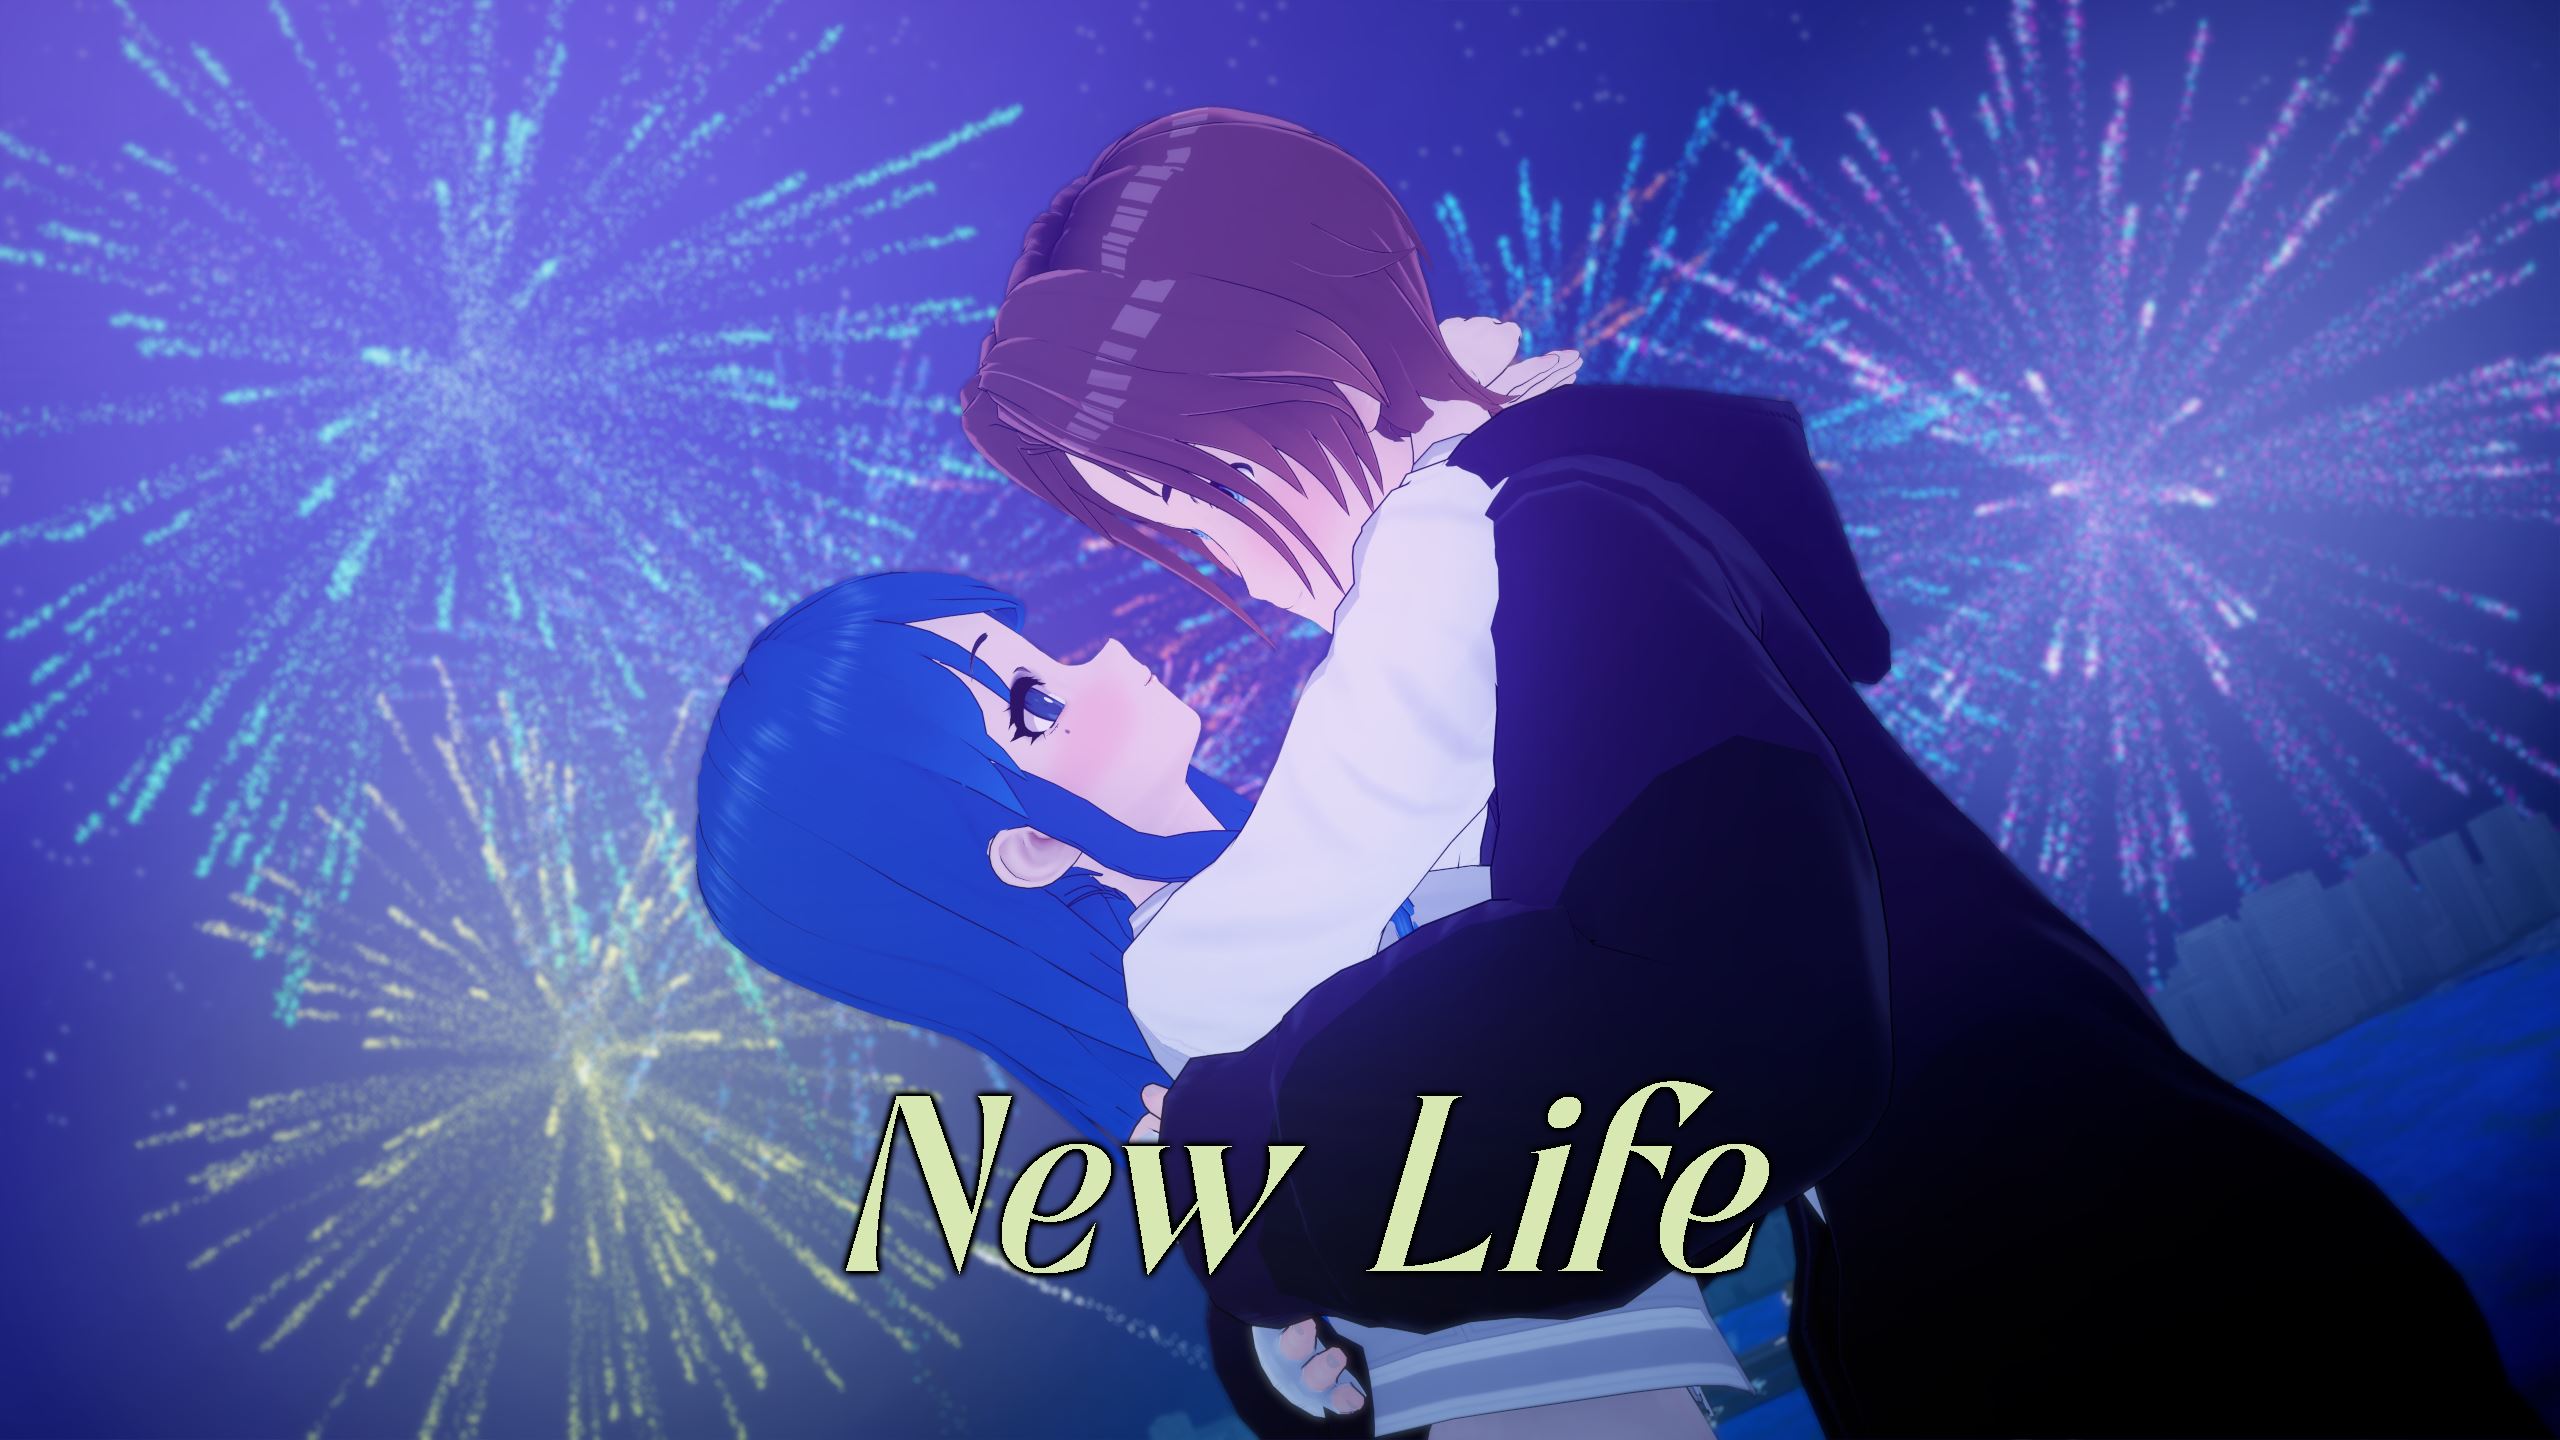 Xxx Kissing Games - New Life RPGM Porn Sex Game v.0.1.3 Download for Windows